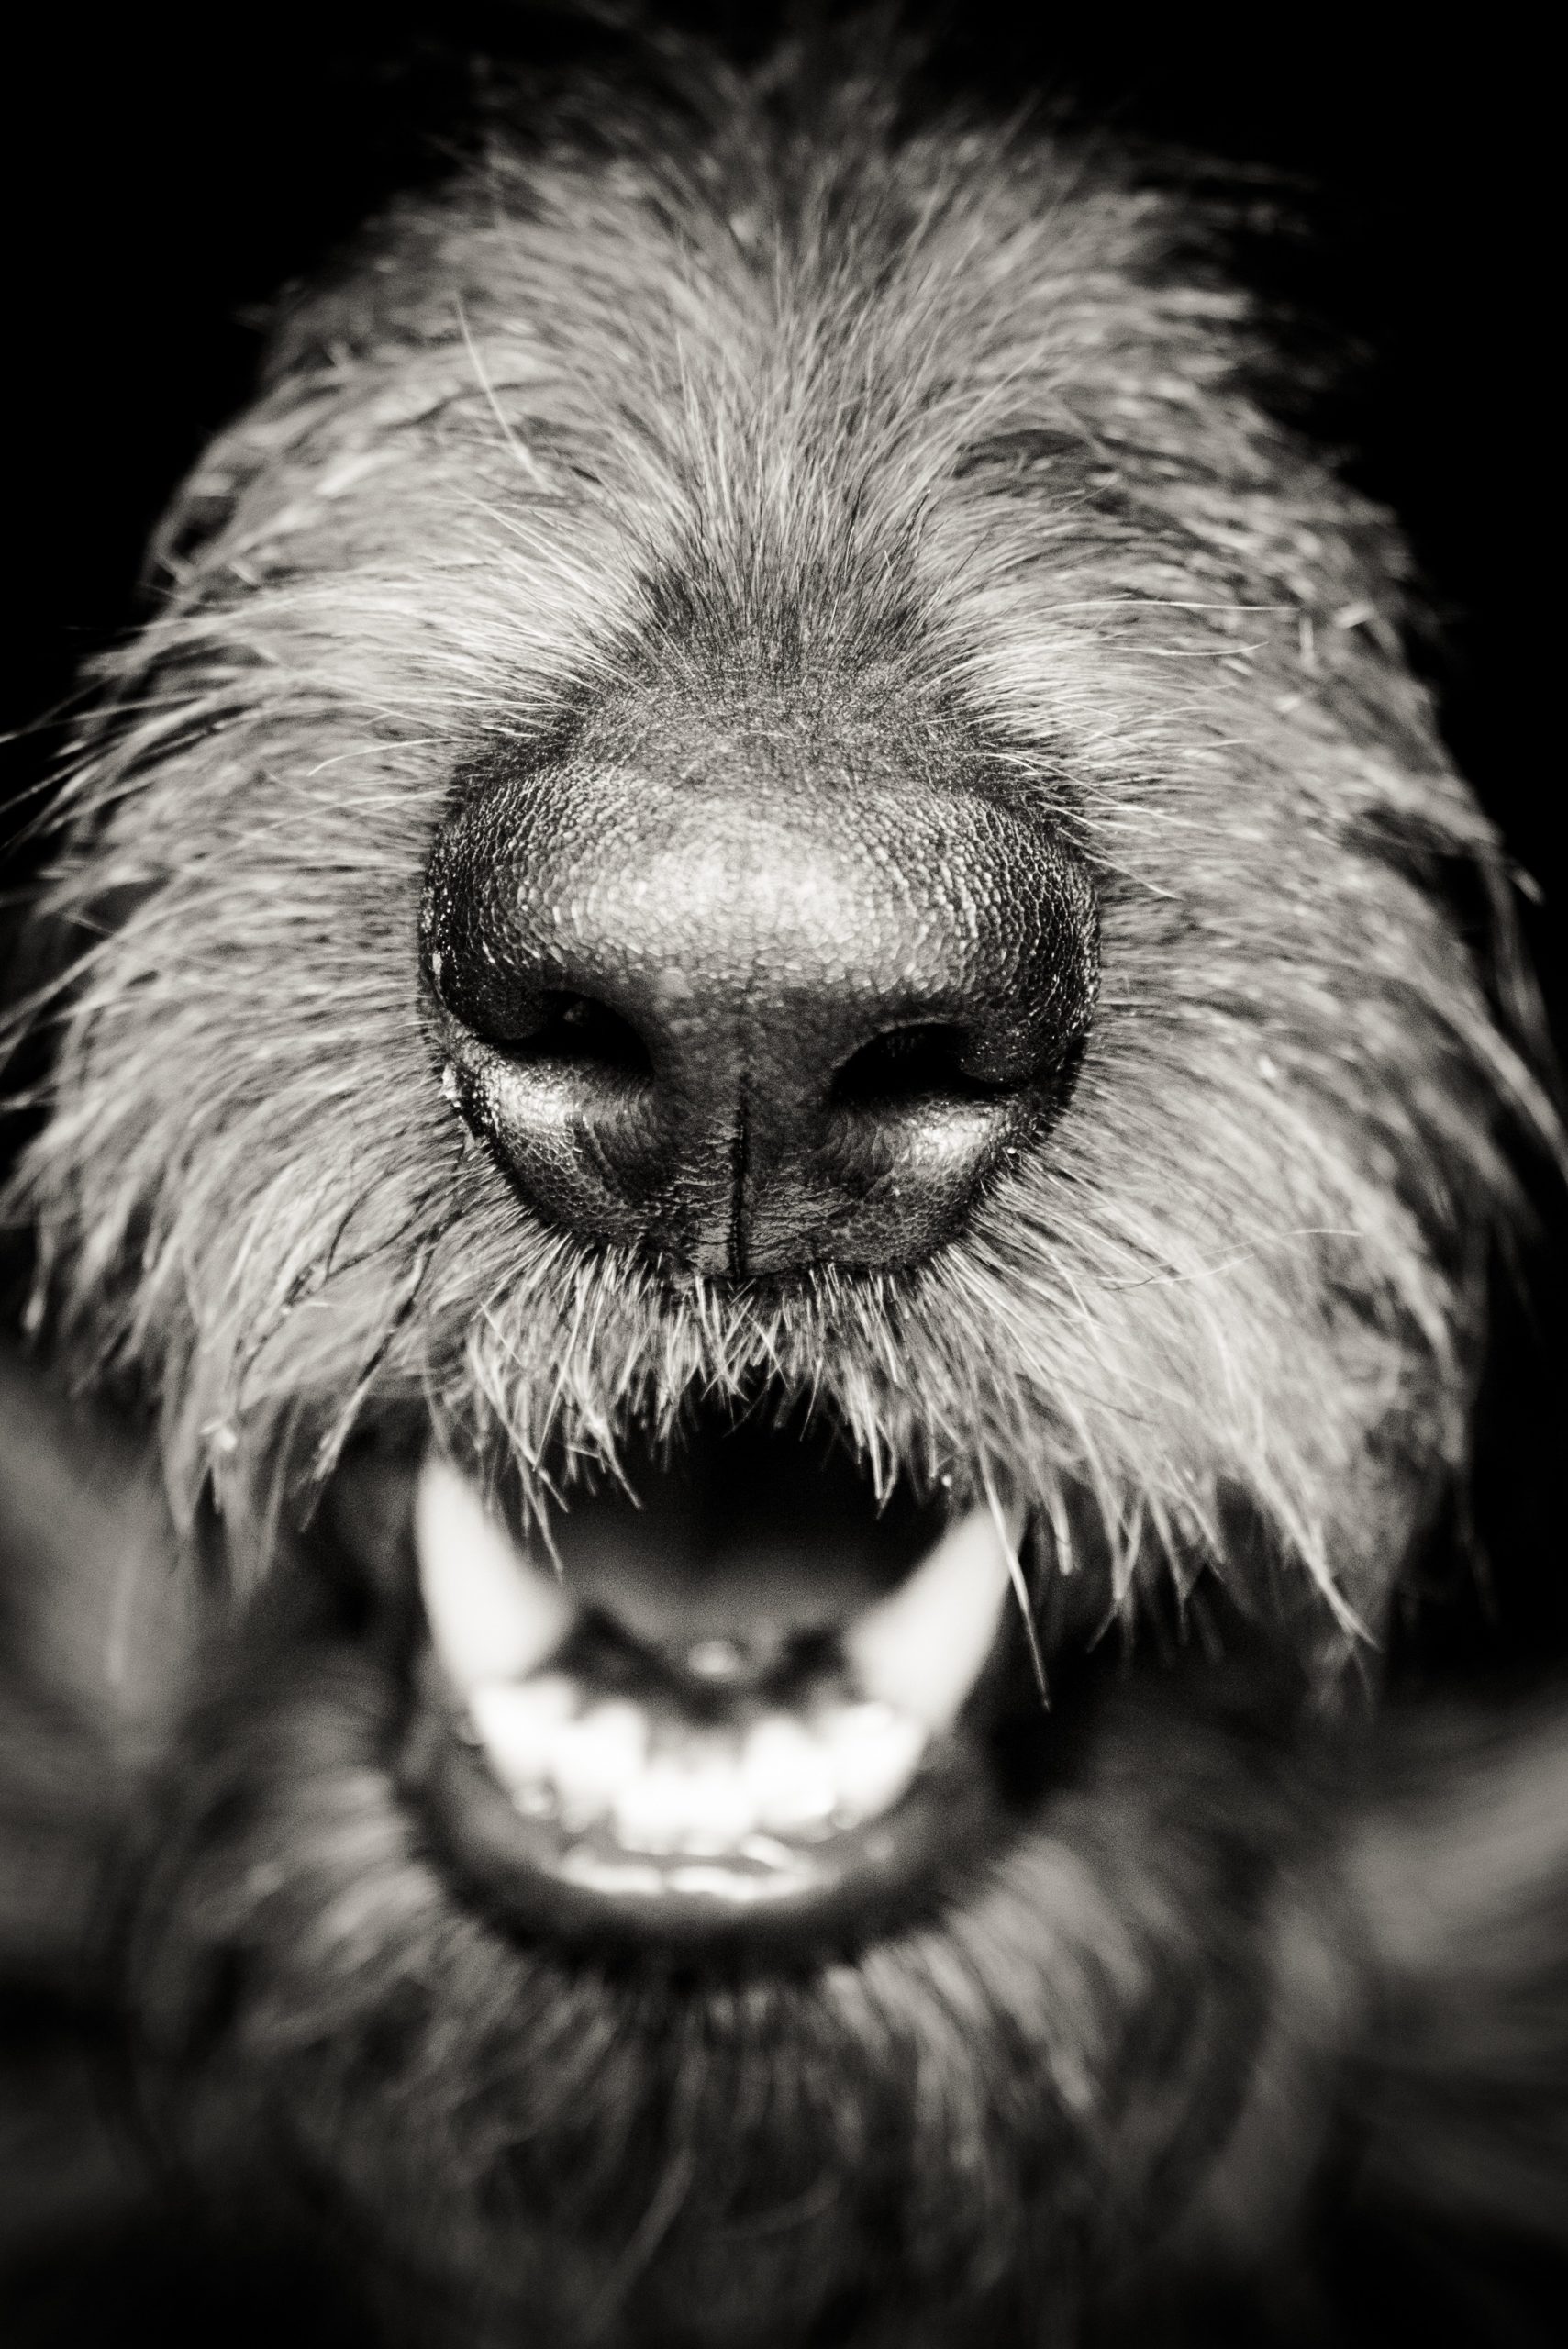 A Wolfhound's nose